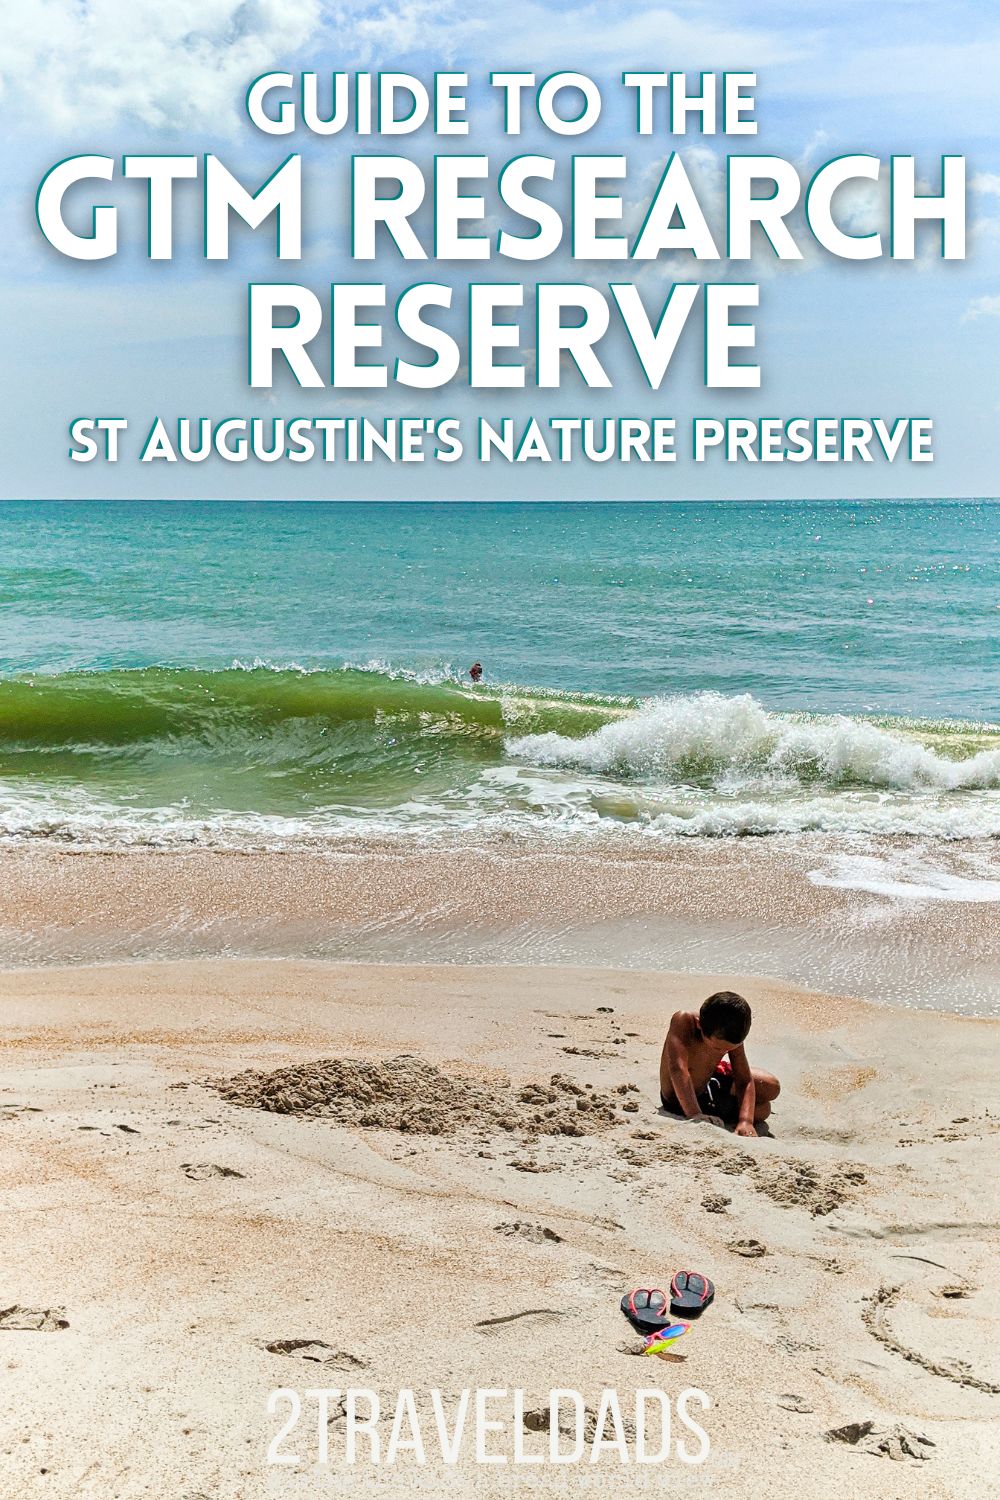 Exploring St Augustine's GTM Research Reserve is a great way to both learn about nature and have the best beach day imaginable. Watch for wildlife and find shark teeth at this beautiful preserve.